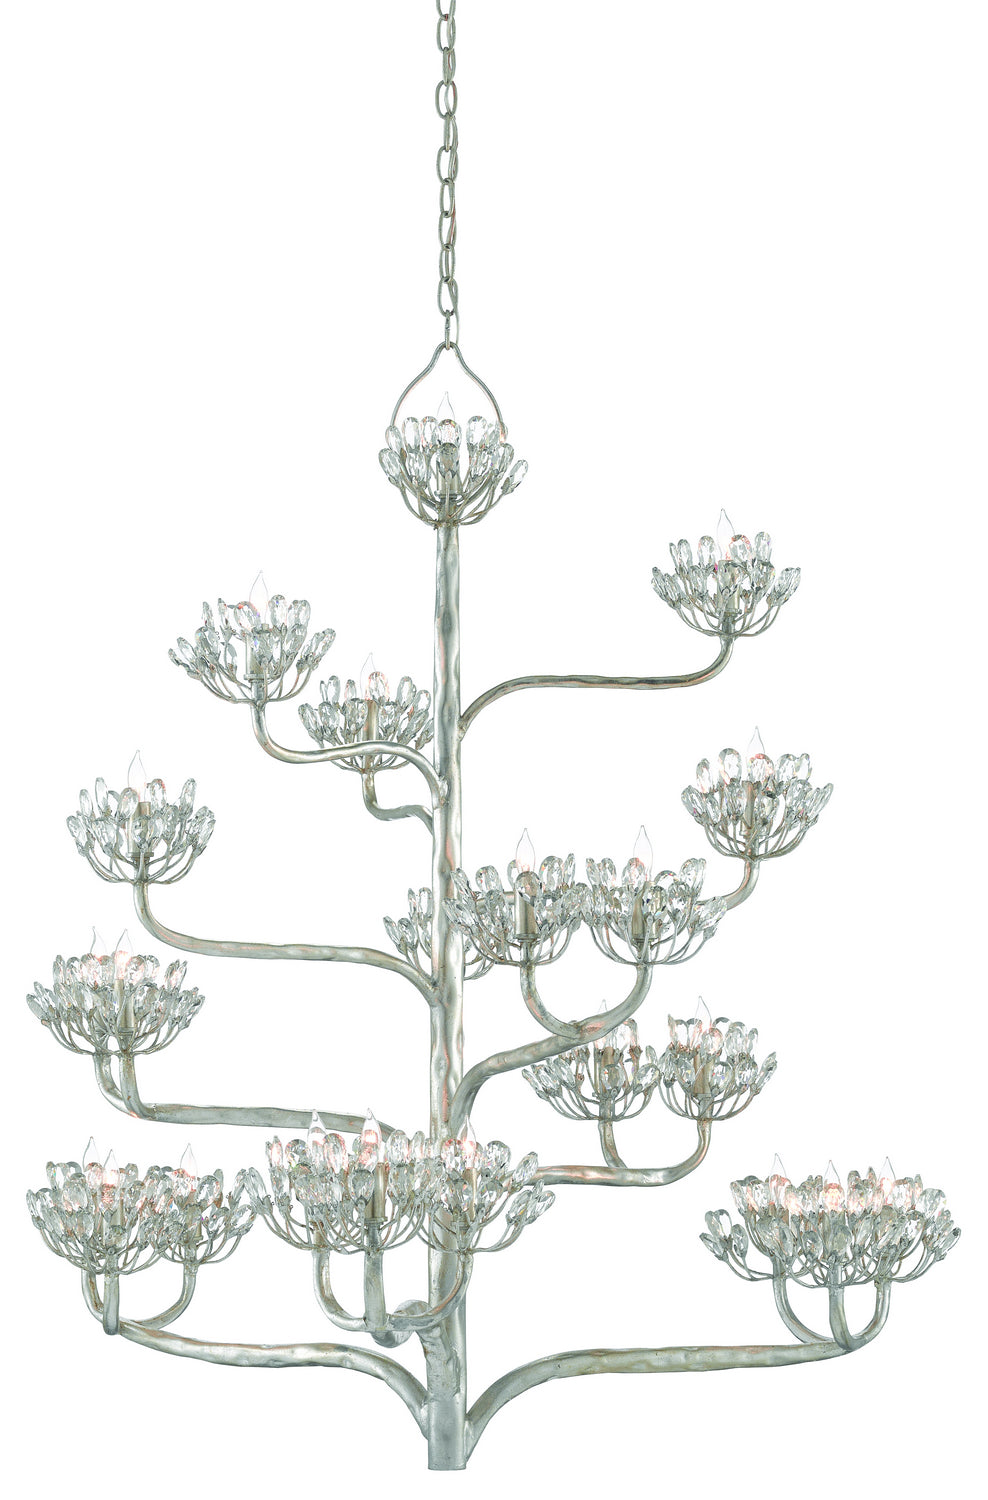 22 Light Chandelier from the Marjorie Skouras collection in Contemporary Silver Leaf finish